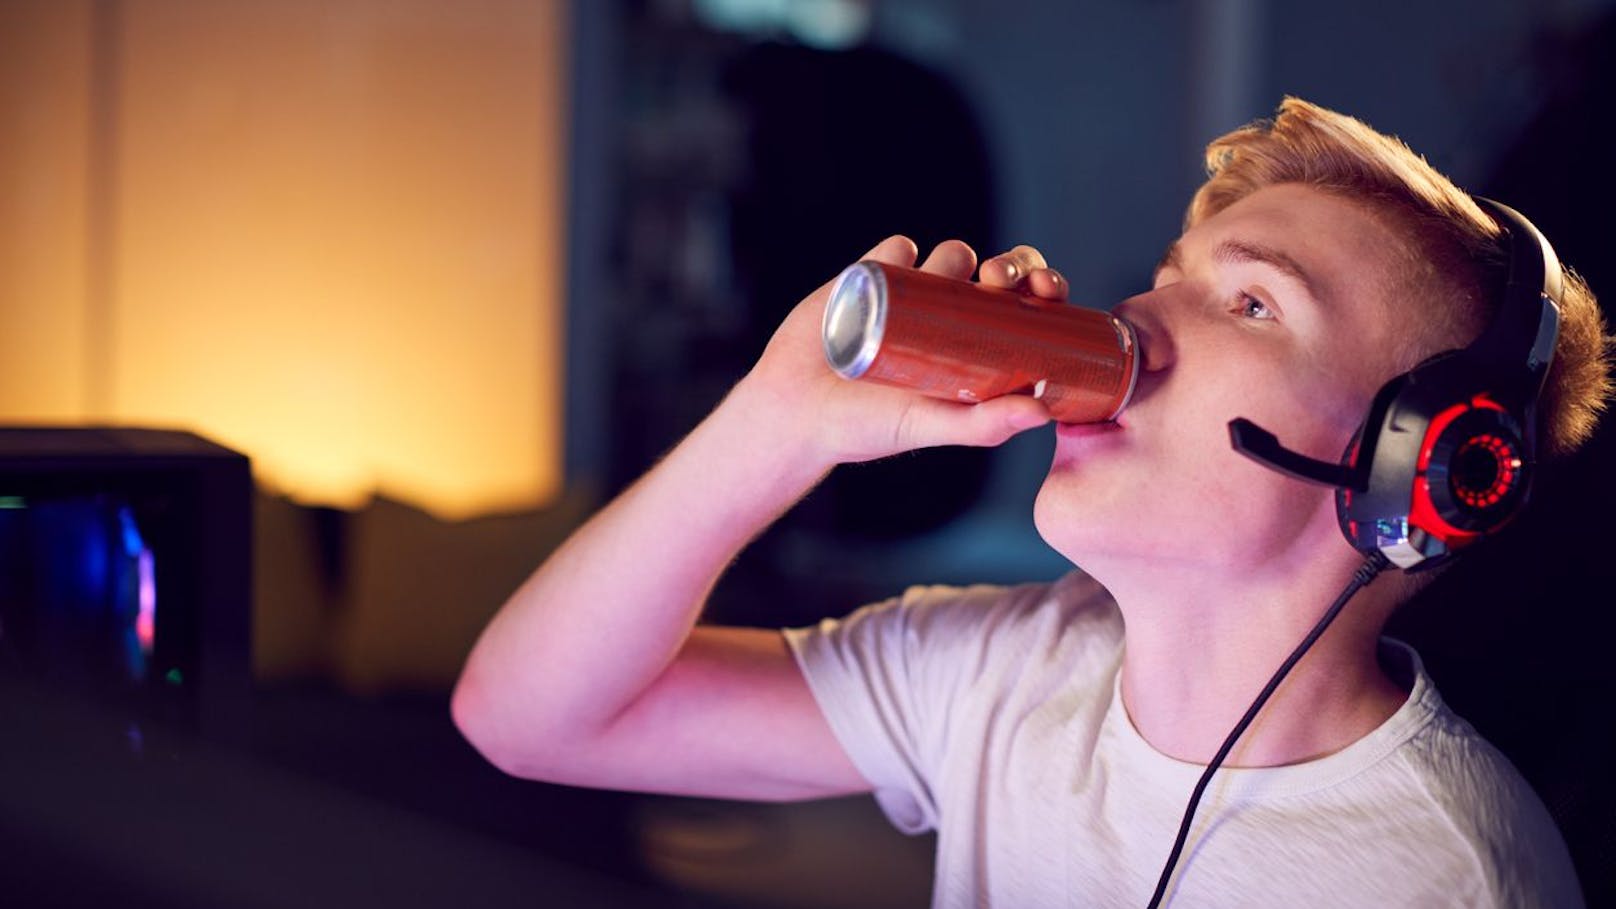 Teenage Boy Drinking Caffeine Energy Drink Gaming At Home Using Dual Computer Screens At Night